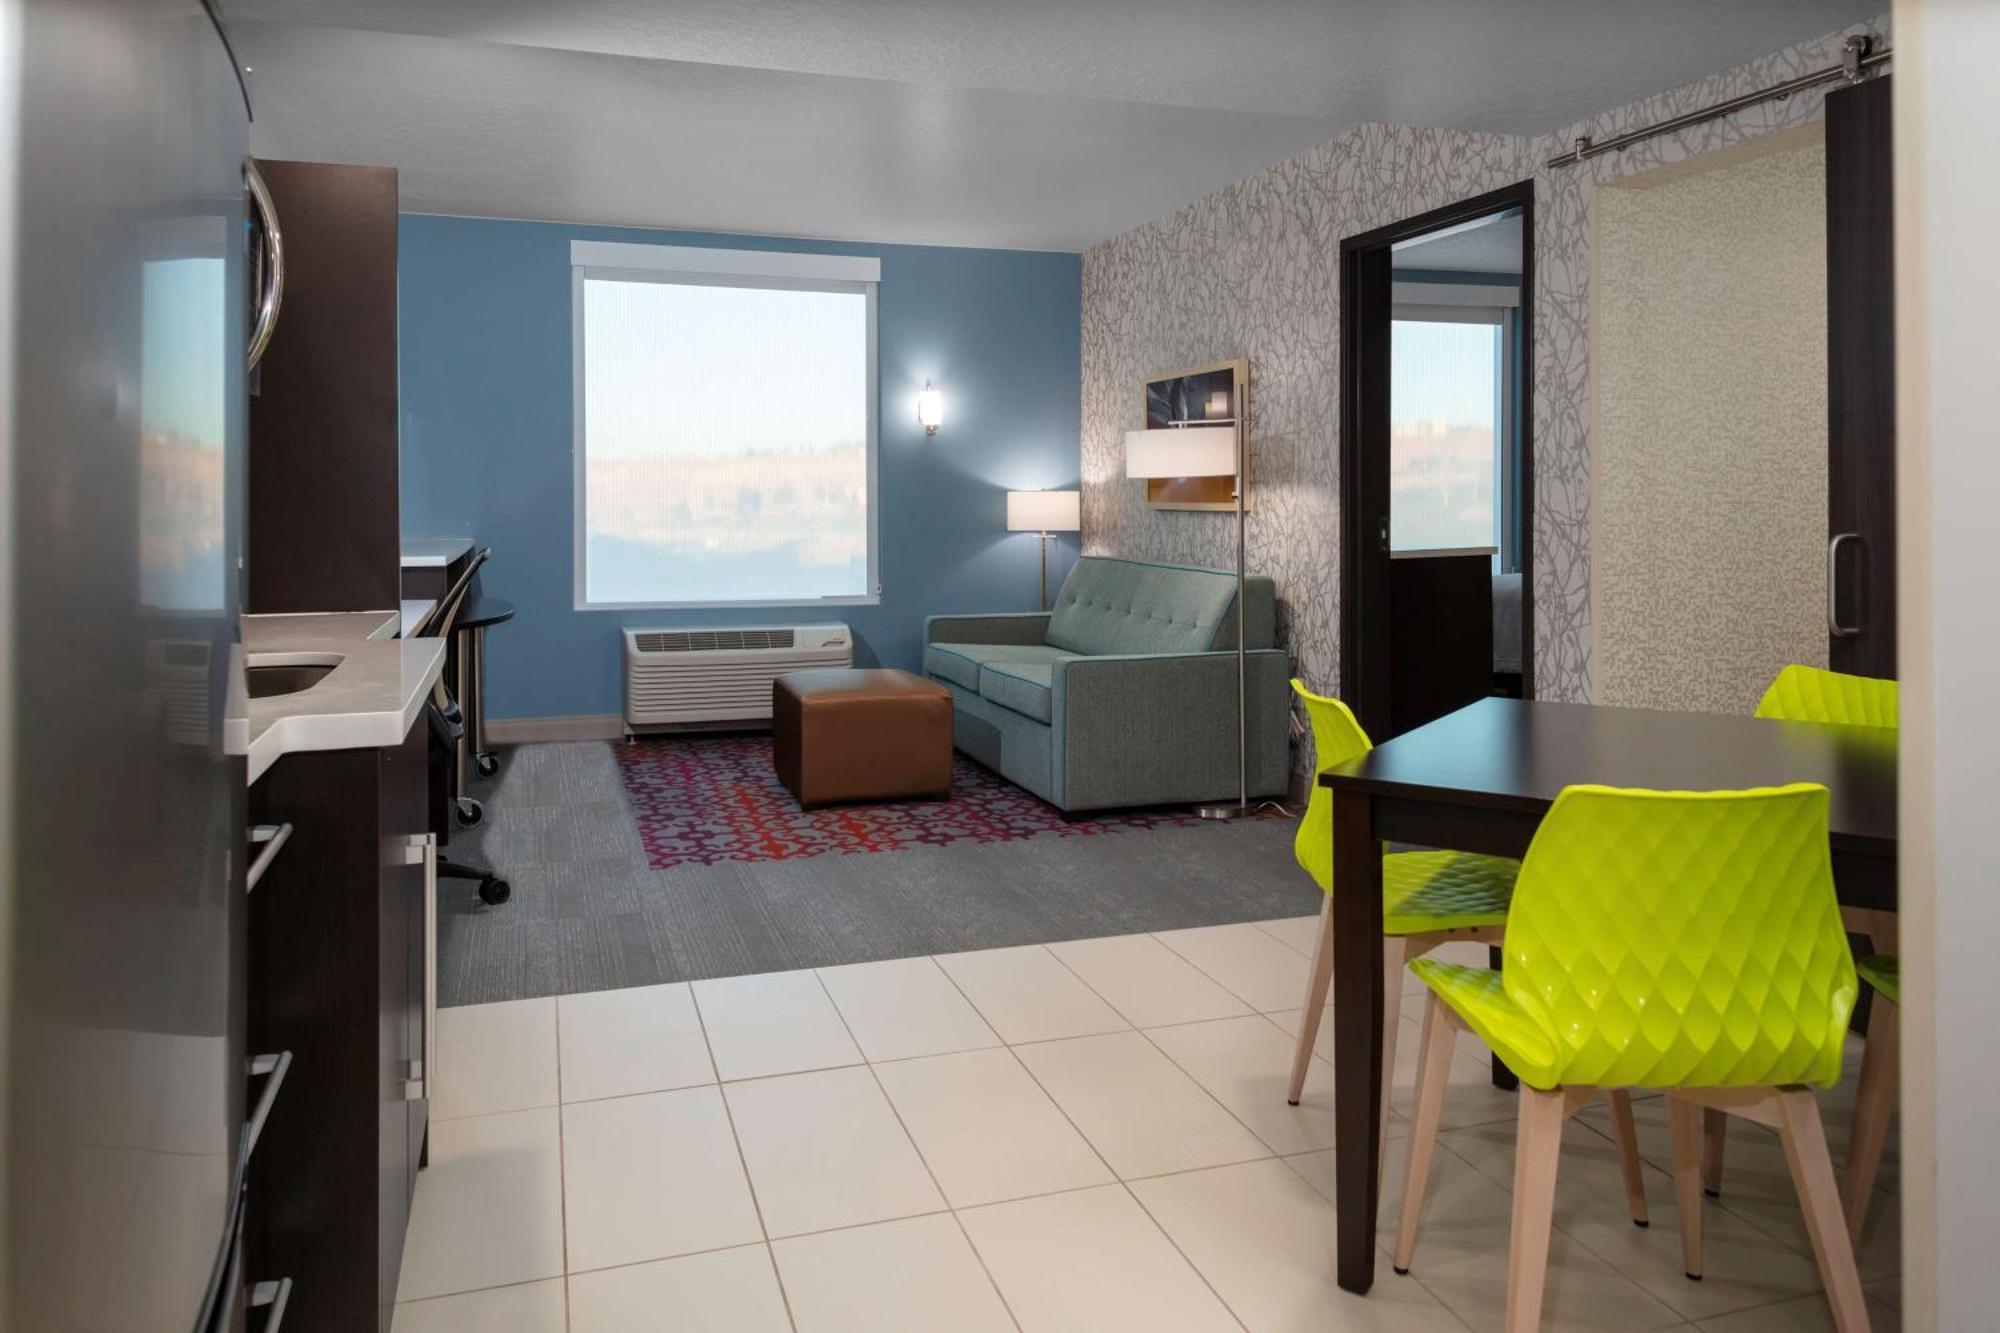 Home2 Suites By Hilton Page Lake Powell Экстерьер фото